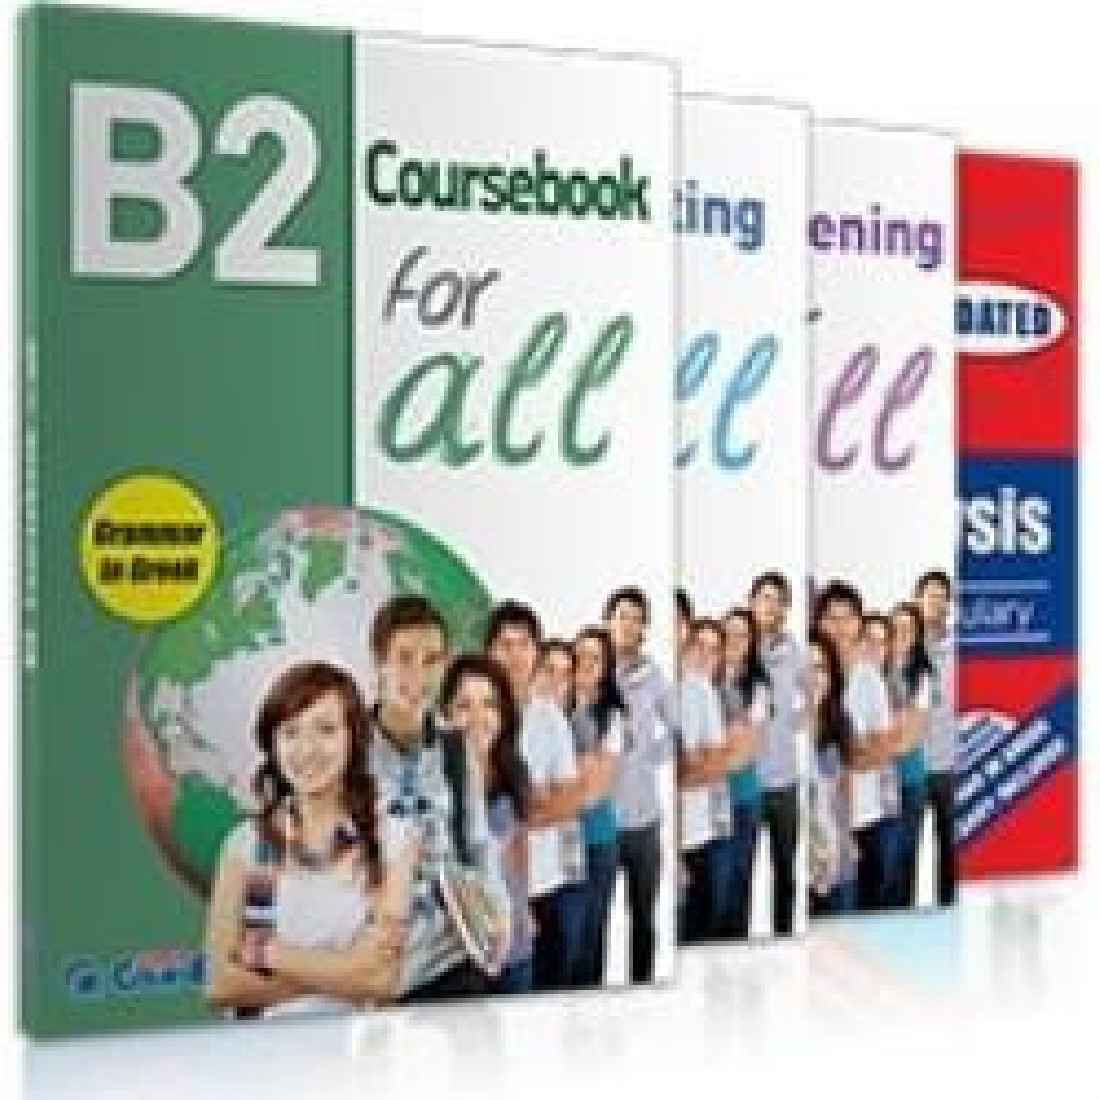 B2 FOR ALL  ΠΛΗΡΕΣ  ΠΑΚΕΤΟ ME COURSE BOOK